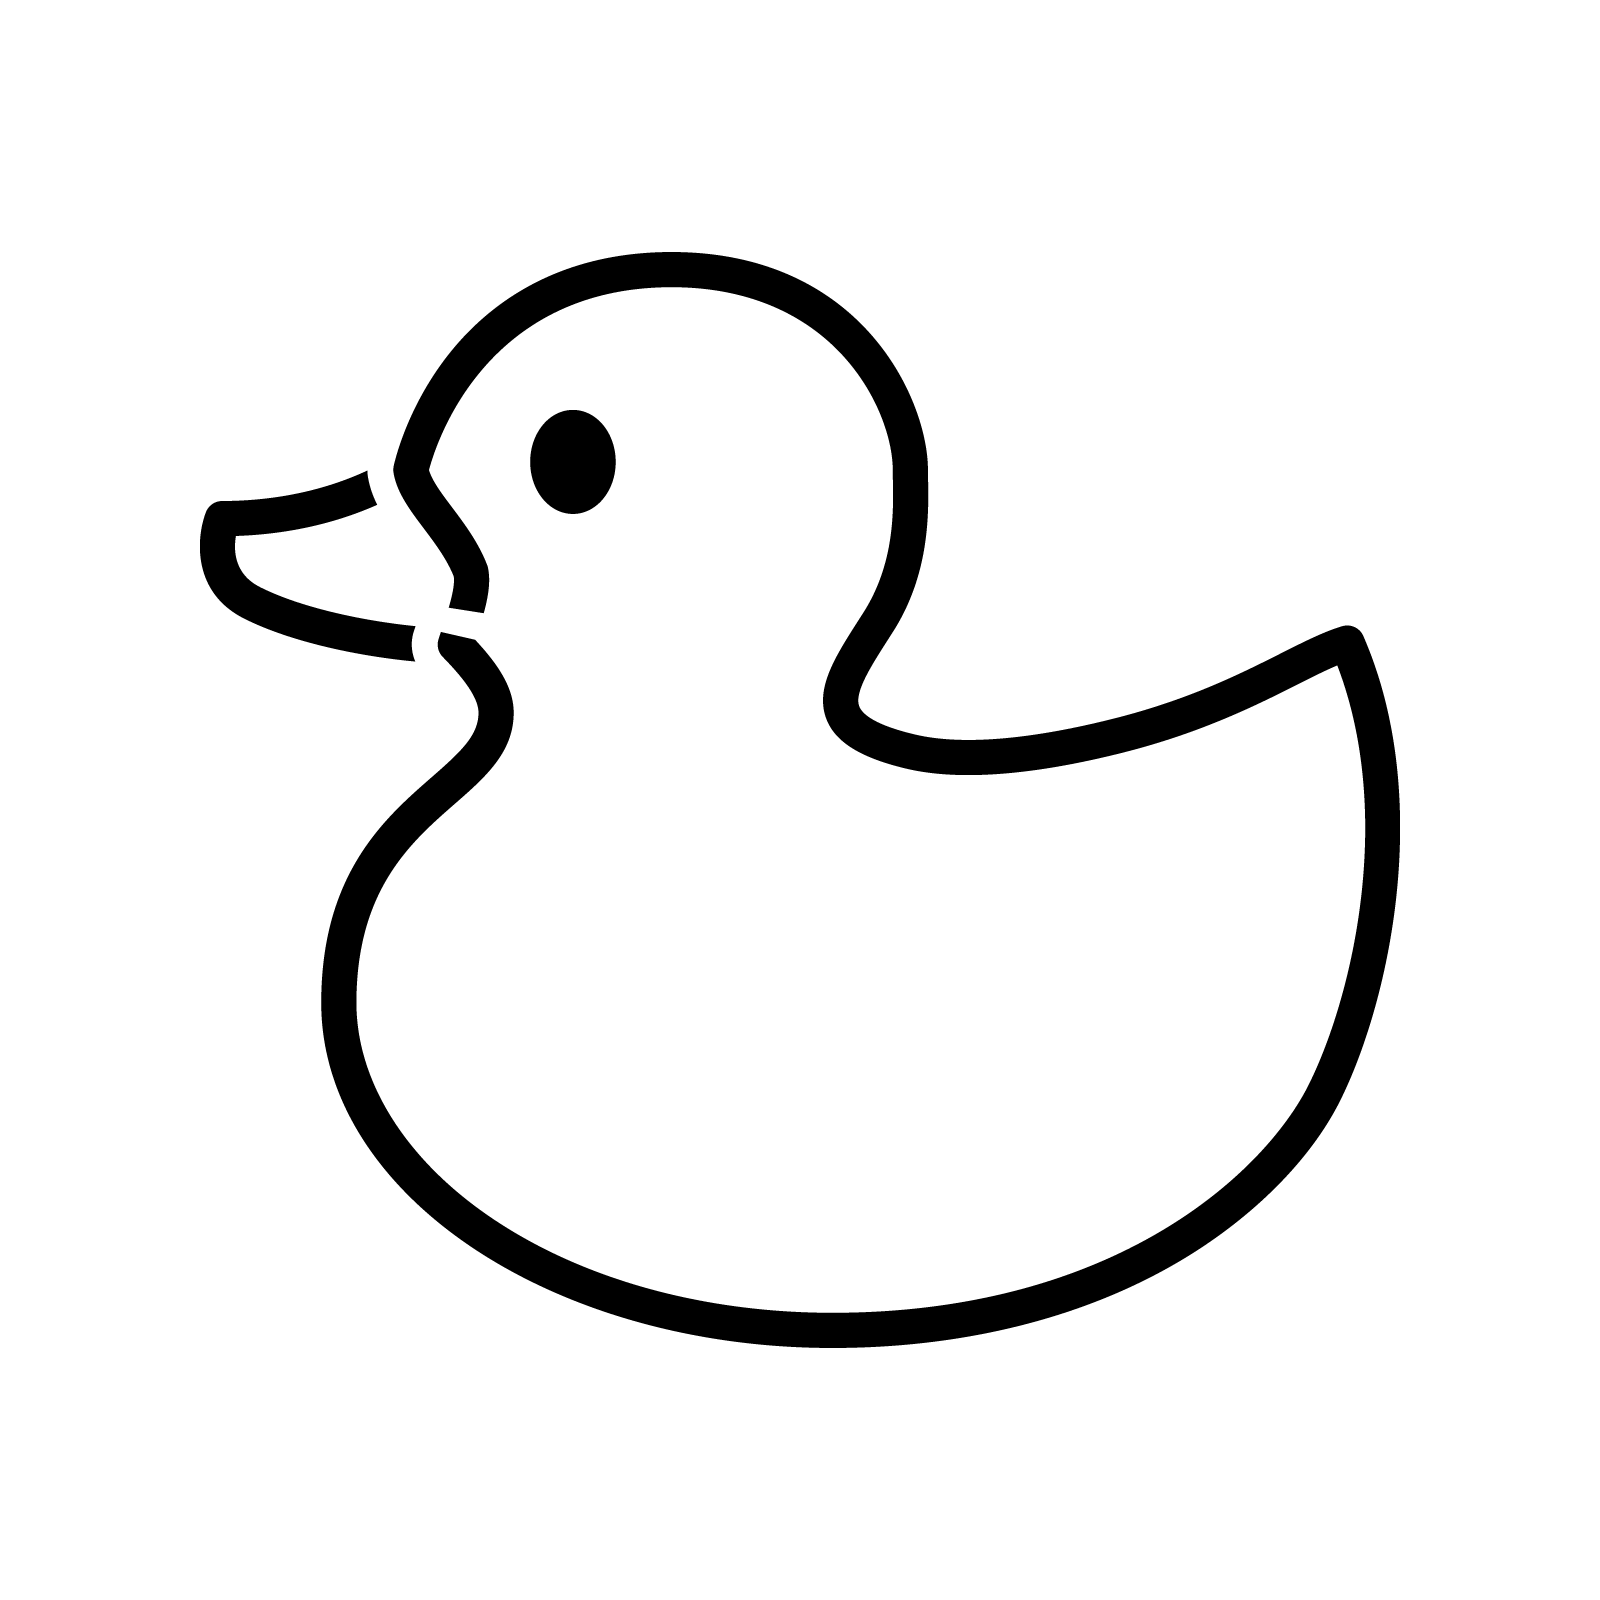 Rubber Ducky Silhouette at GetDrawings Free download